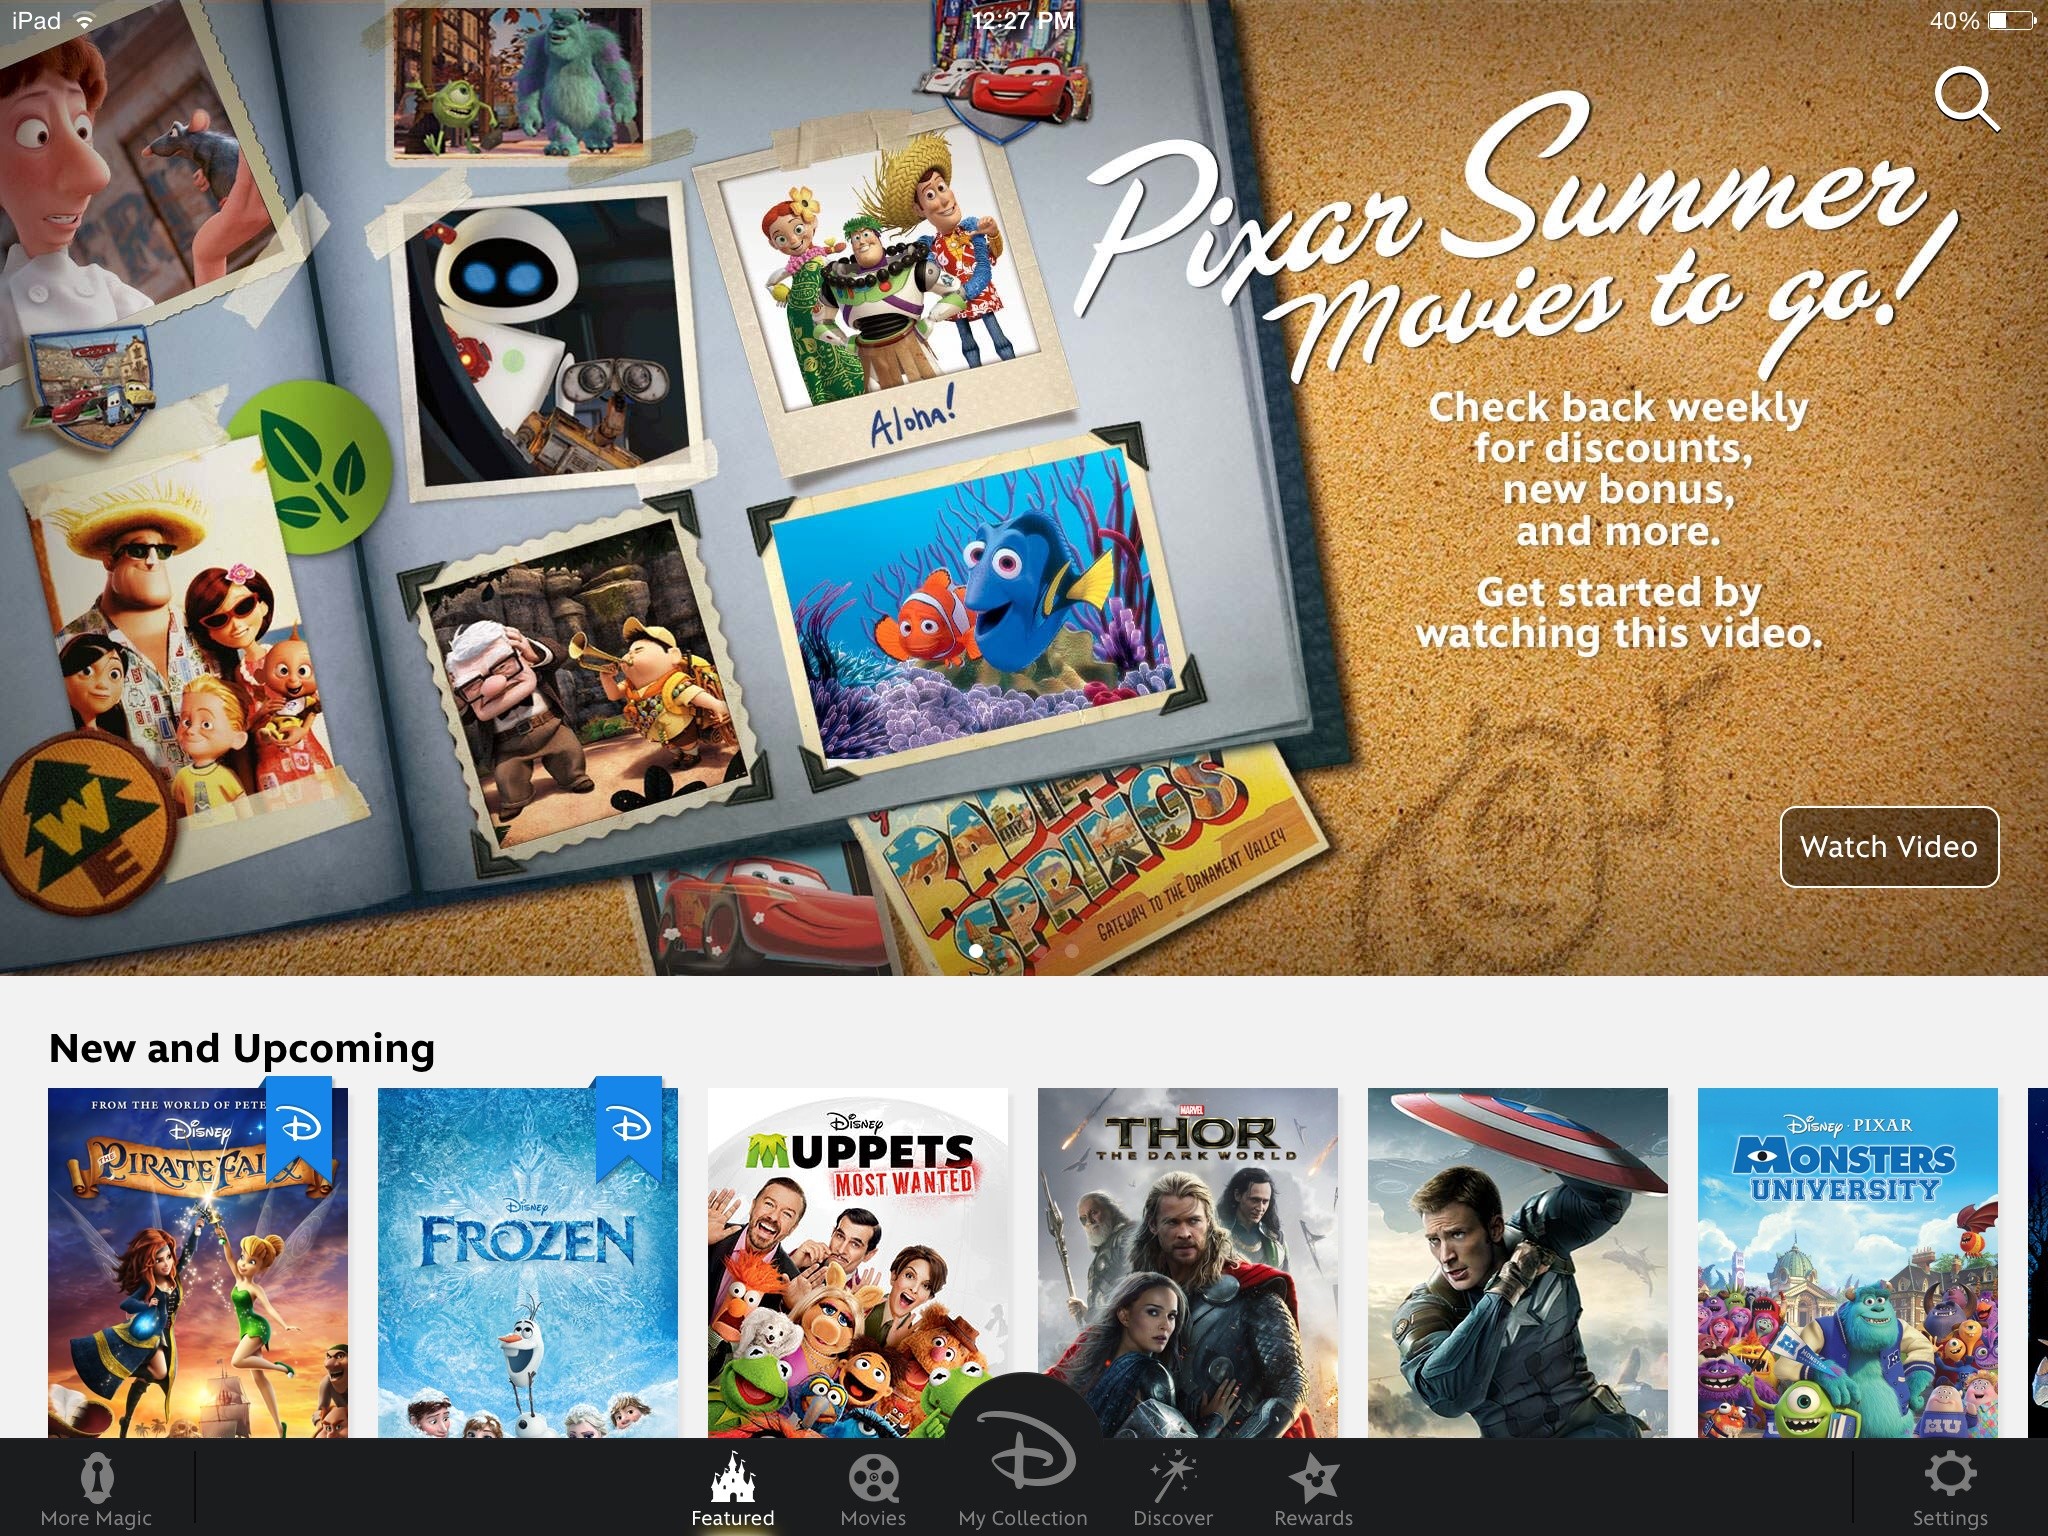 Disney Movies Anywhere Now Offers Pixar Summer Movies To Go